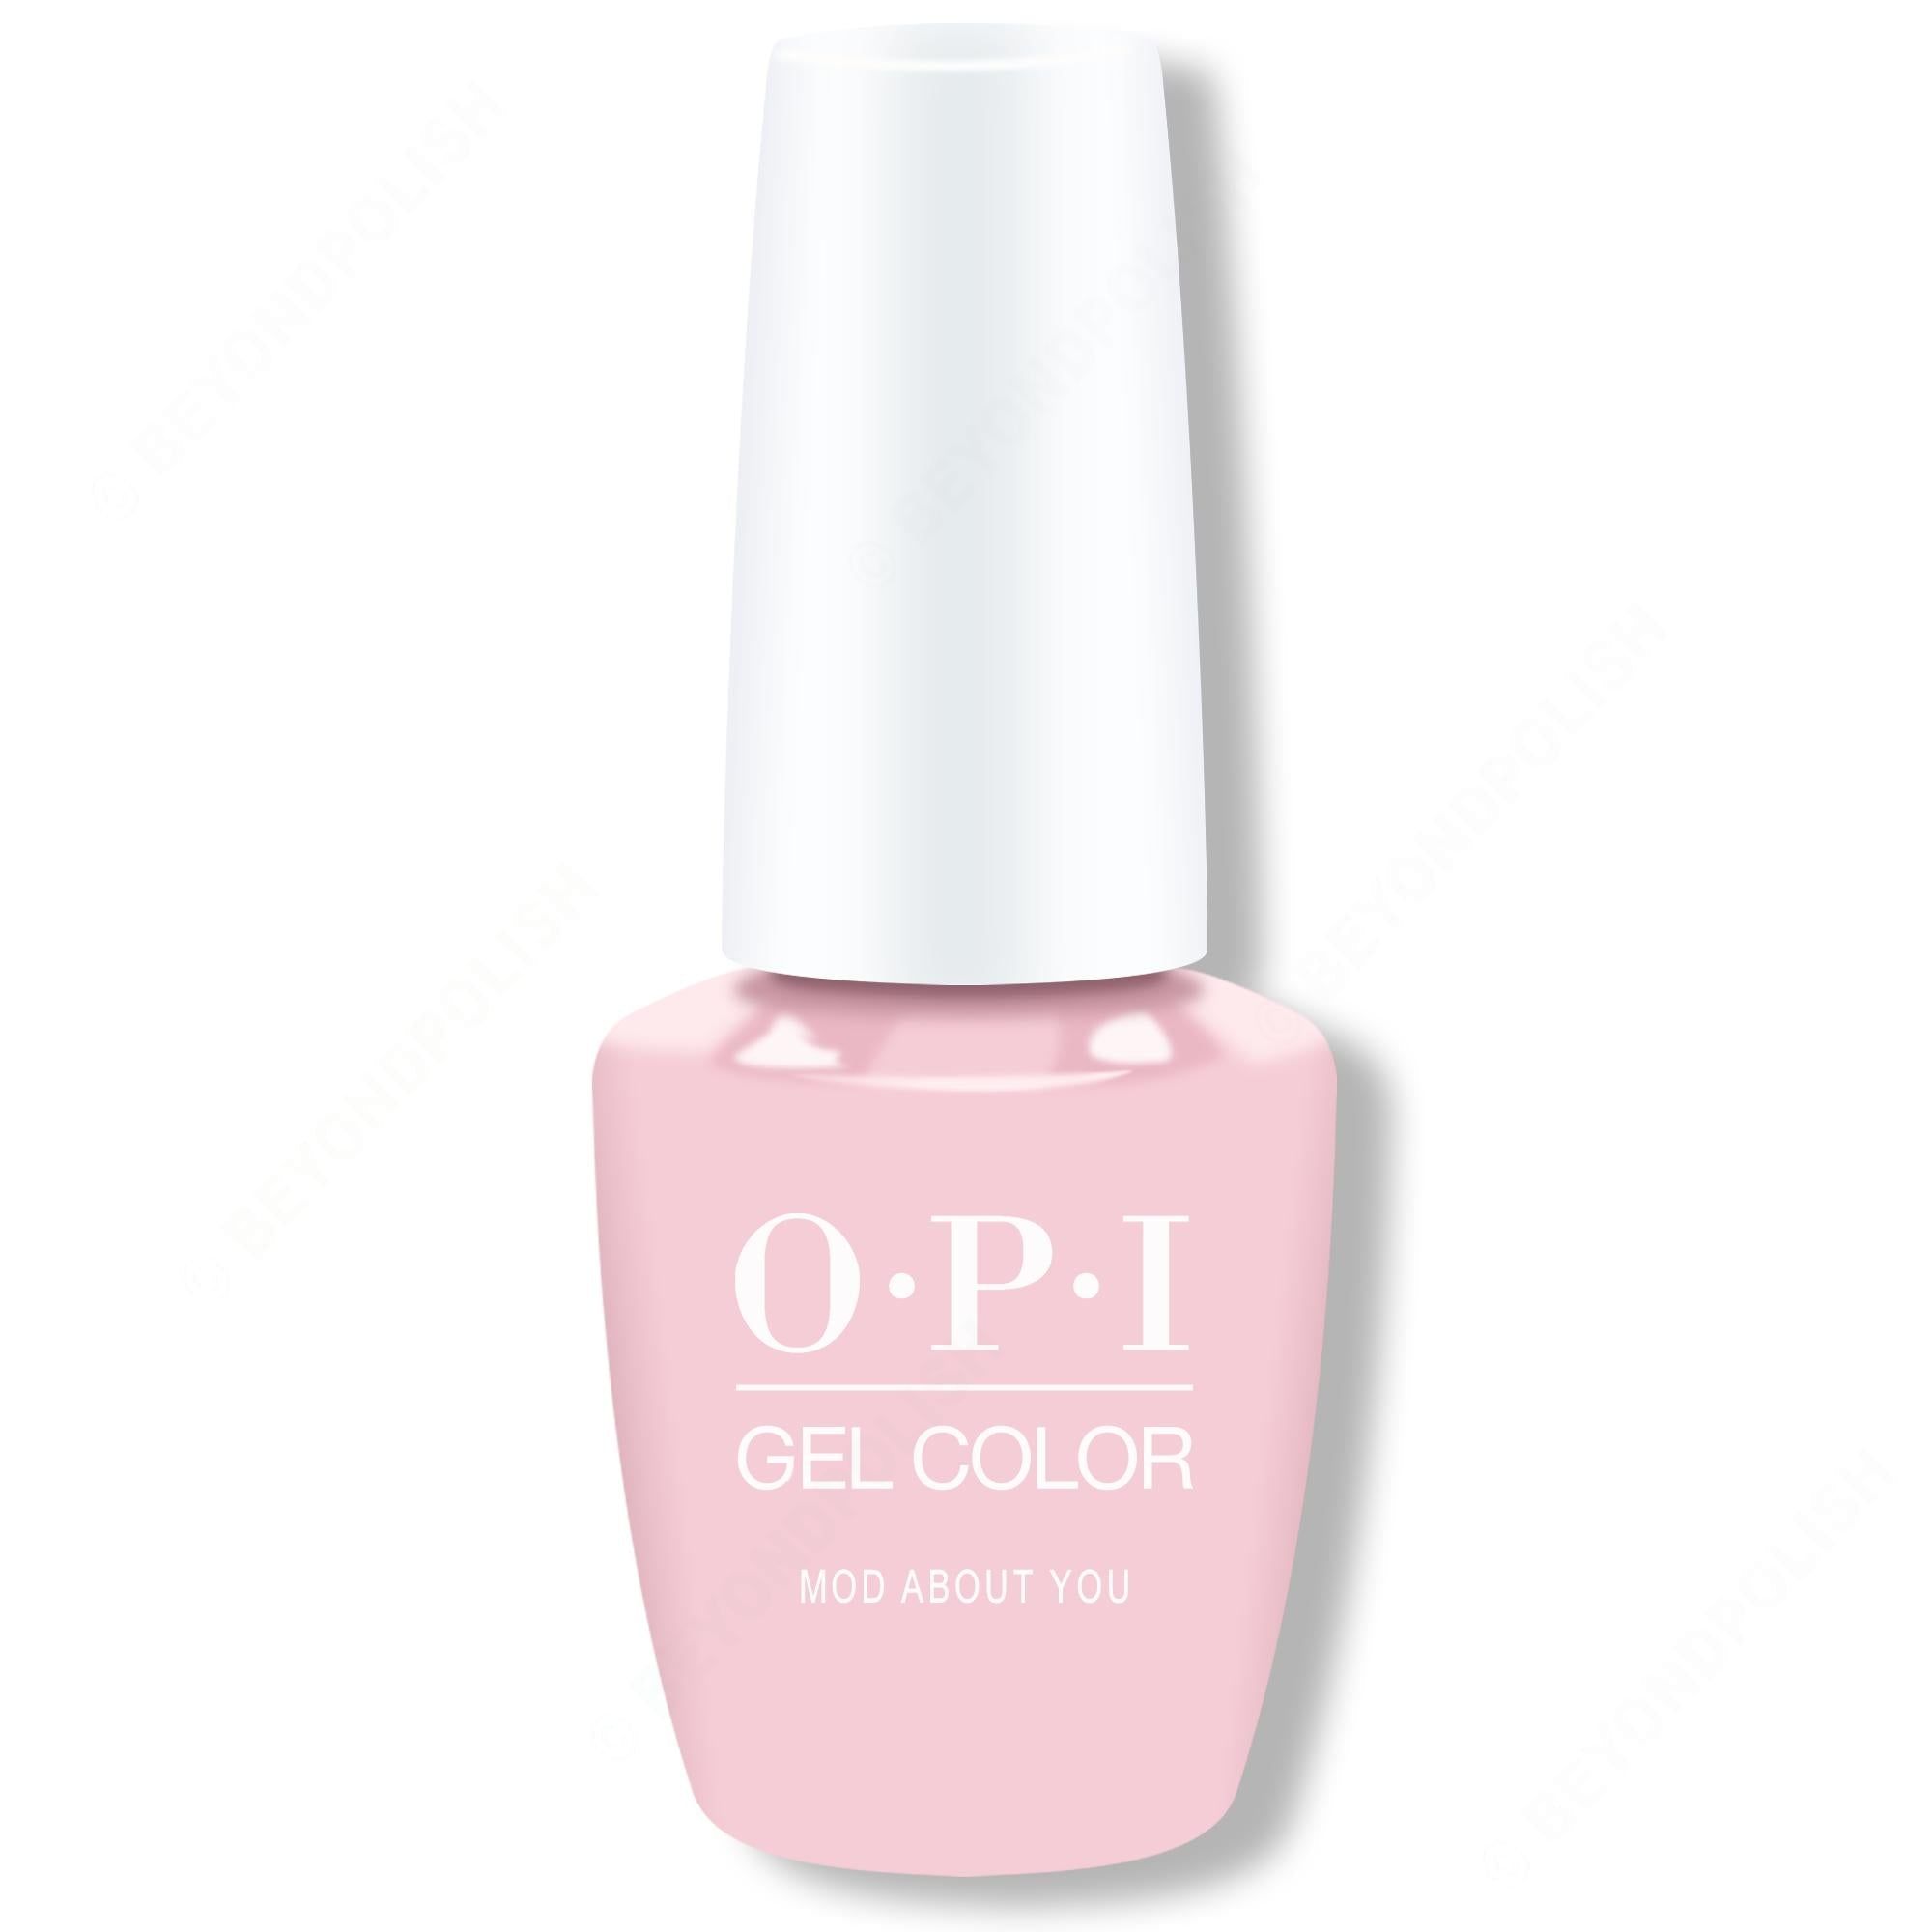 OPI Gel Color - Mod About You 0.5 oz - #GCB56